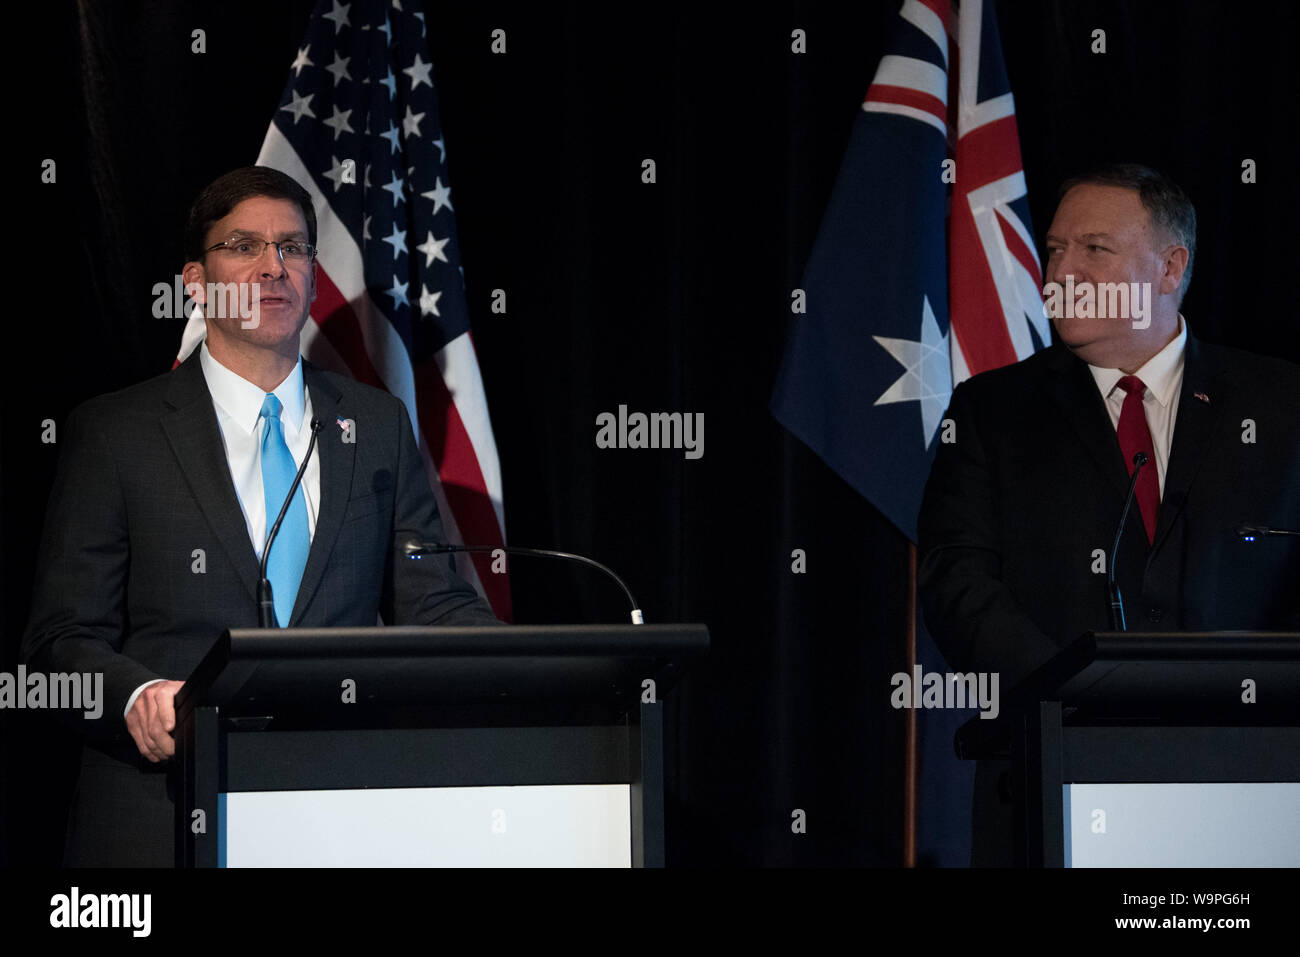 U.S. Secretary of State Mike Pompeo and Secretary of Defense Dr. Mark T. Esper hold a press conference with their Australian counterparts, Minister of Foreign Affairs Marise Payne and Minister of Defence Linda Reynolds, at the Parliament of New South Wales building, Sydney, Australia, Aug. 4, 2019. (DoD photo by U.S. Army Sgt. Amber I. Smith) Stock Photo